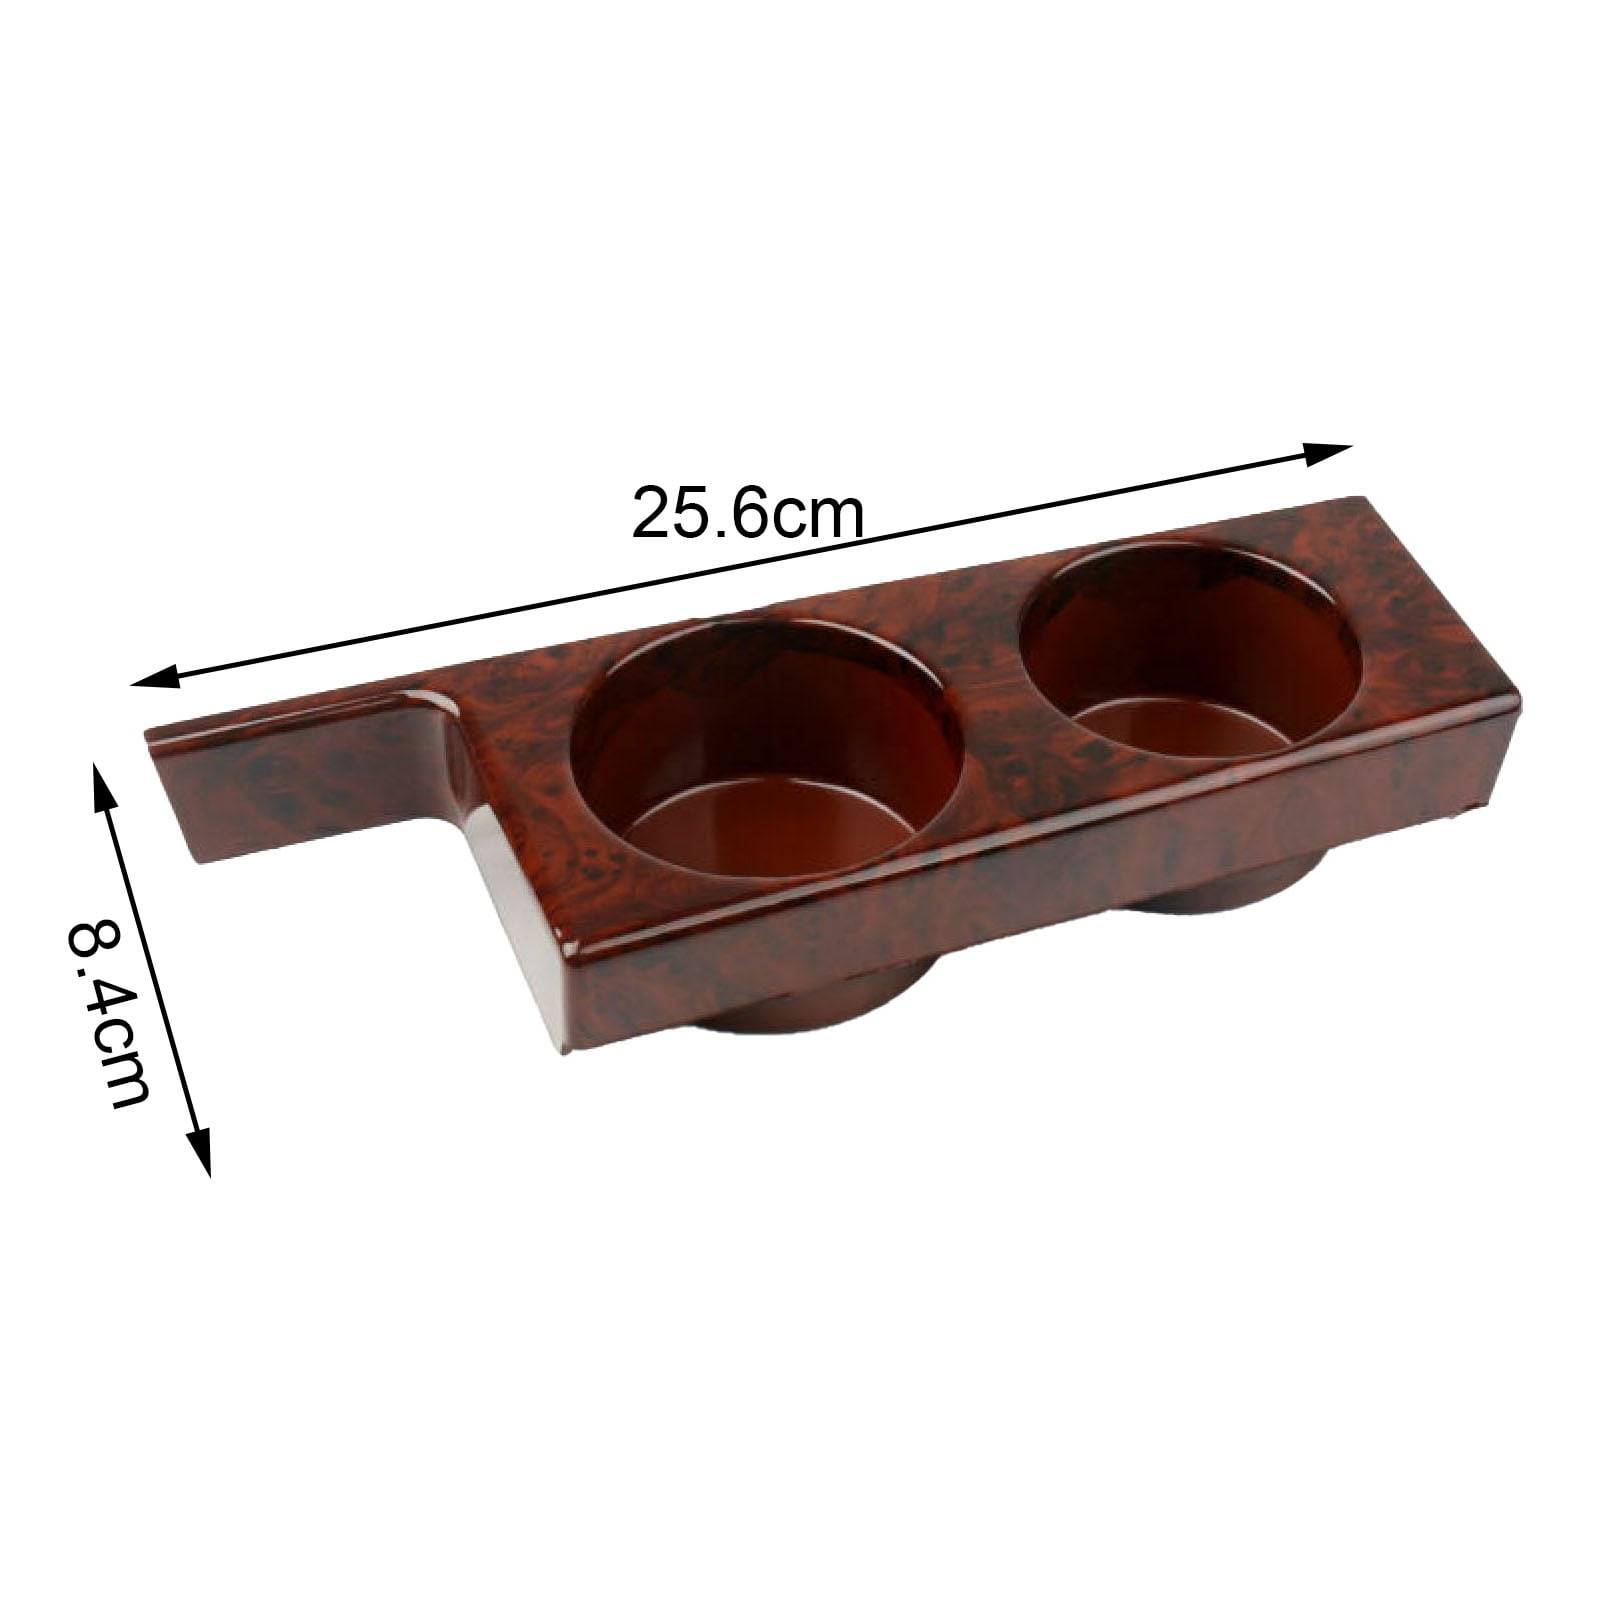 Hesroicy Car Cup Holder Wood Grain Durable Drink Bottle Holder with Gap for  BMW 5 Series 540i M5 E39 97-03 